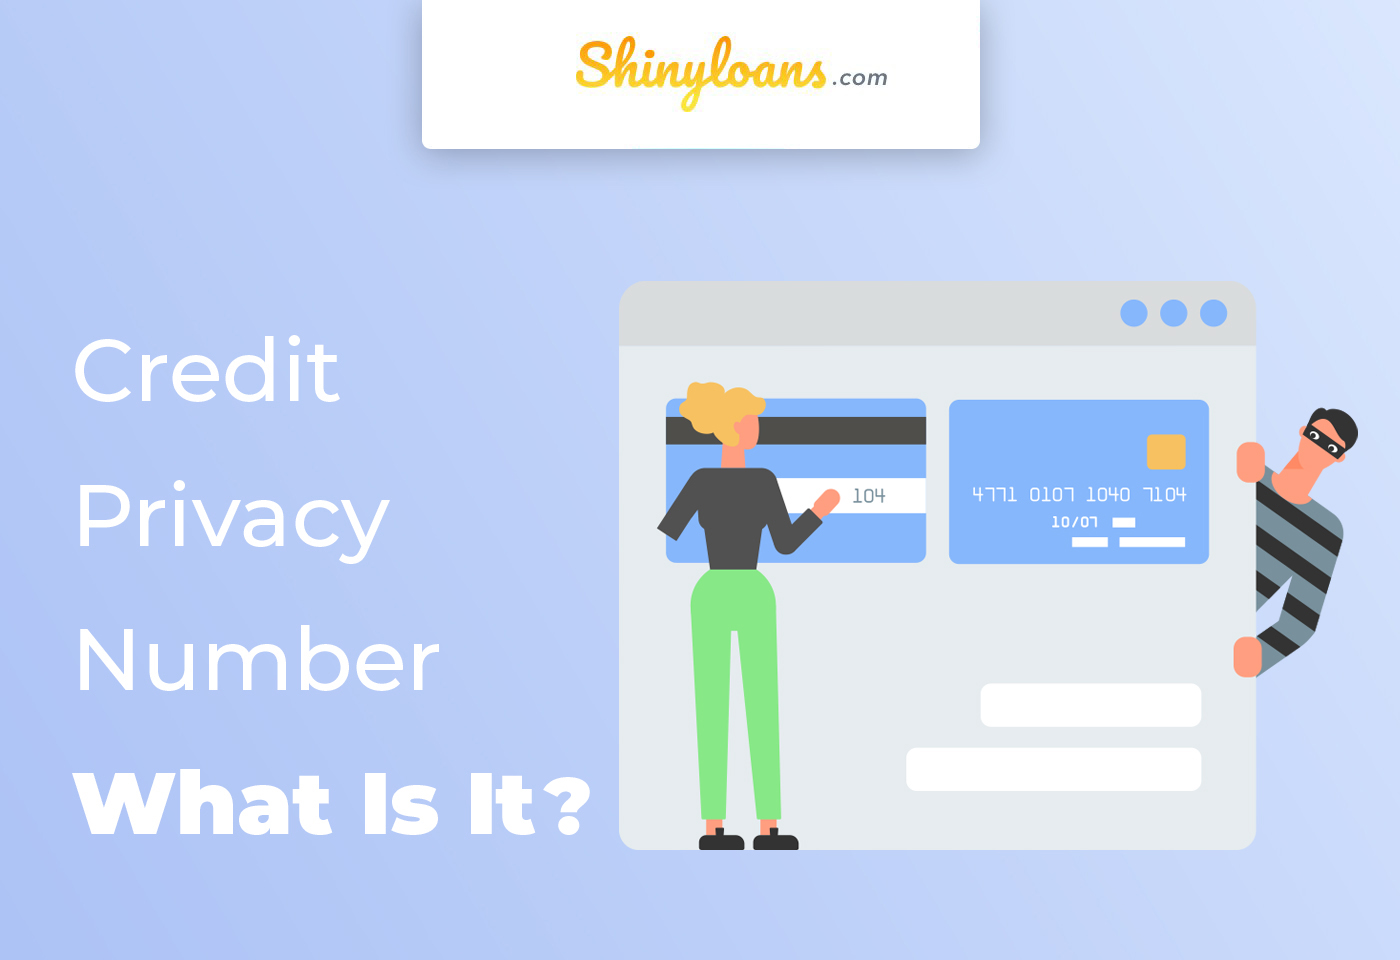 A Credit Privacy Number - What Is It?